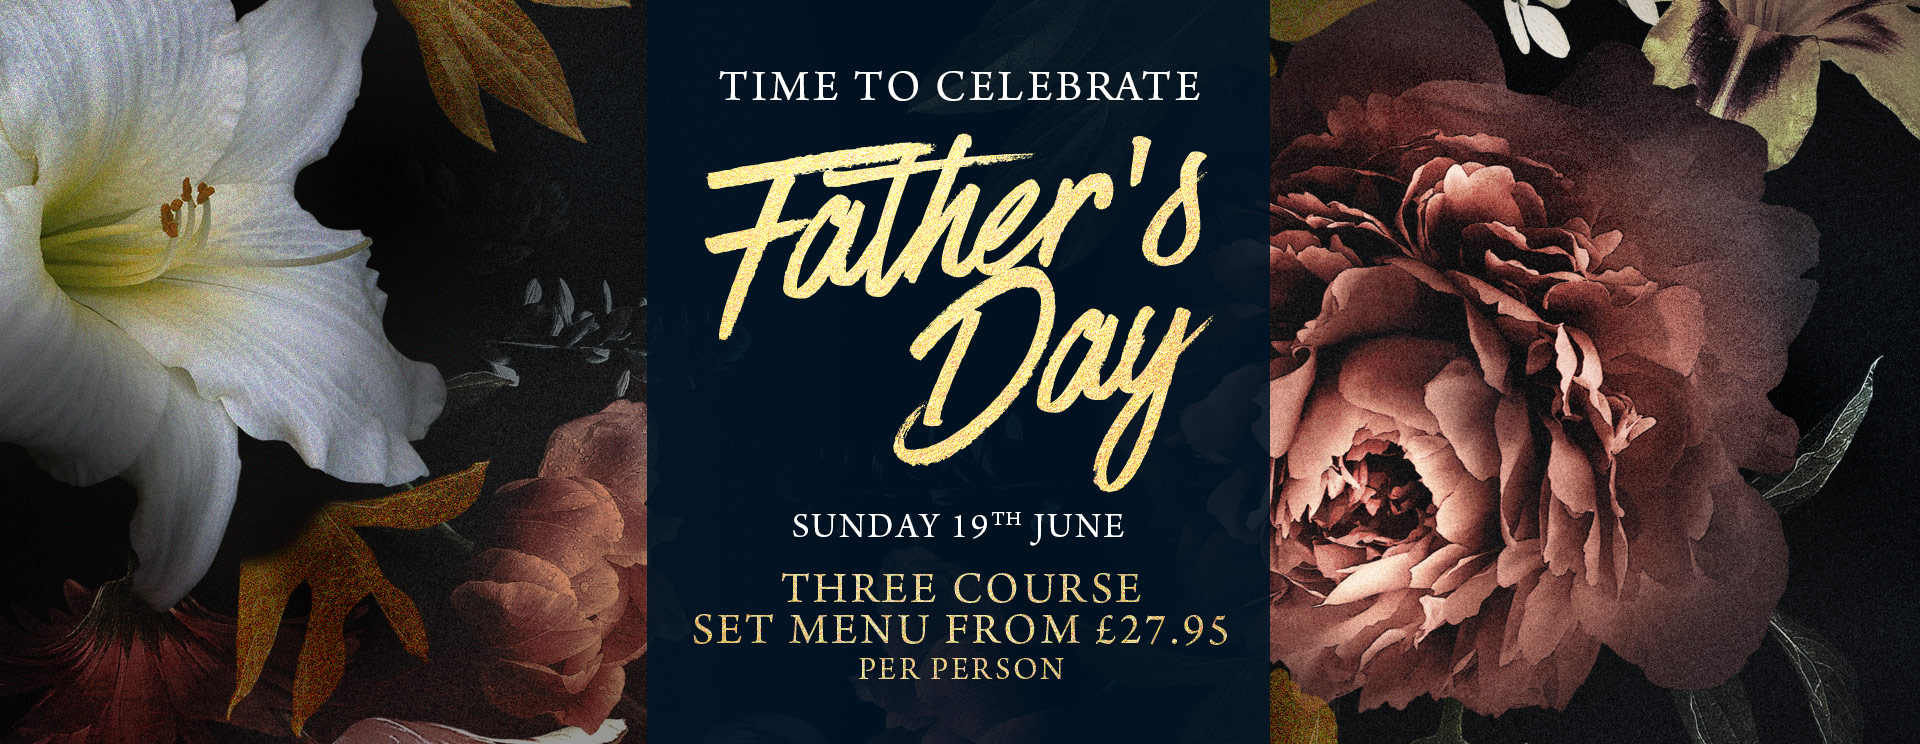 Fathers Day at The Red Lion